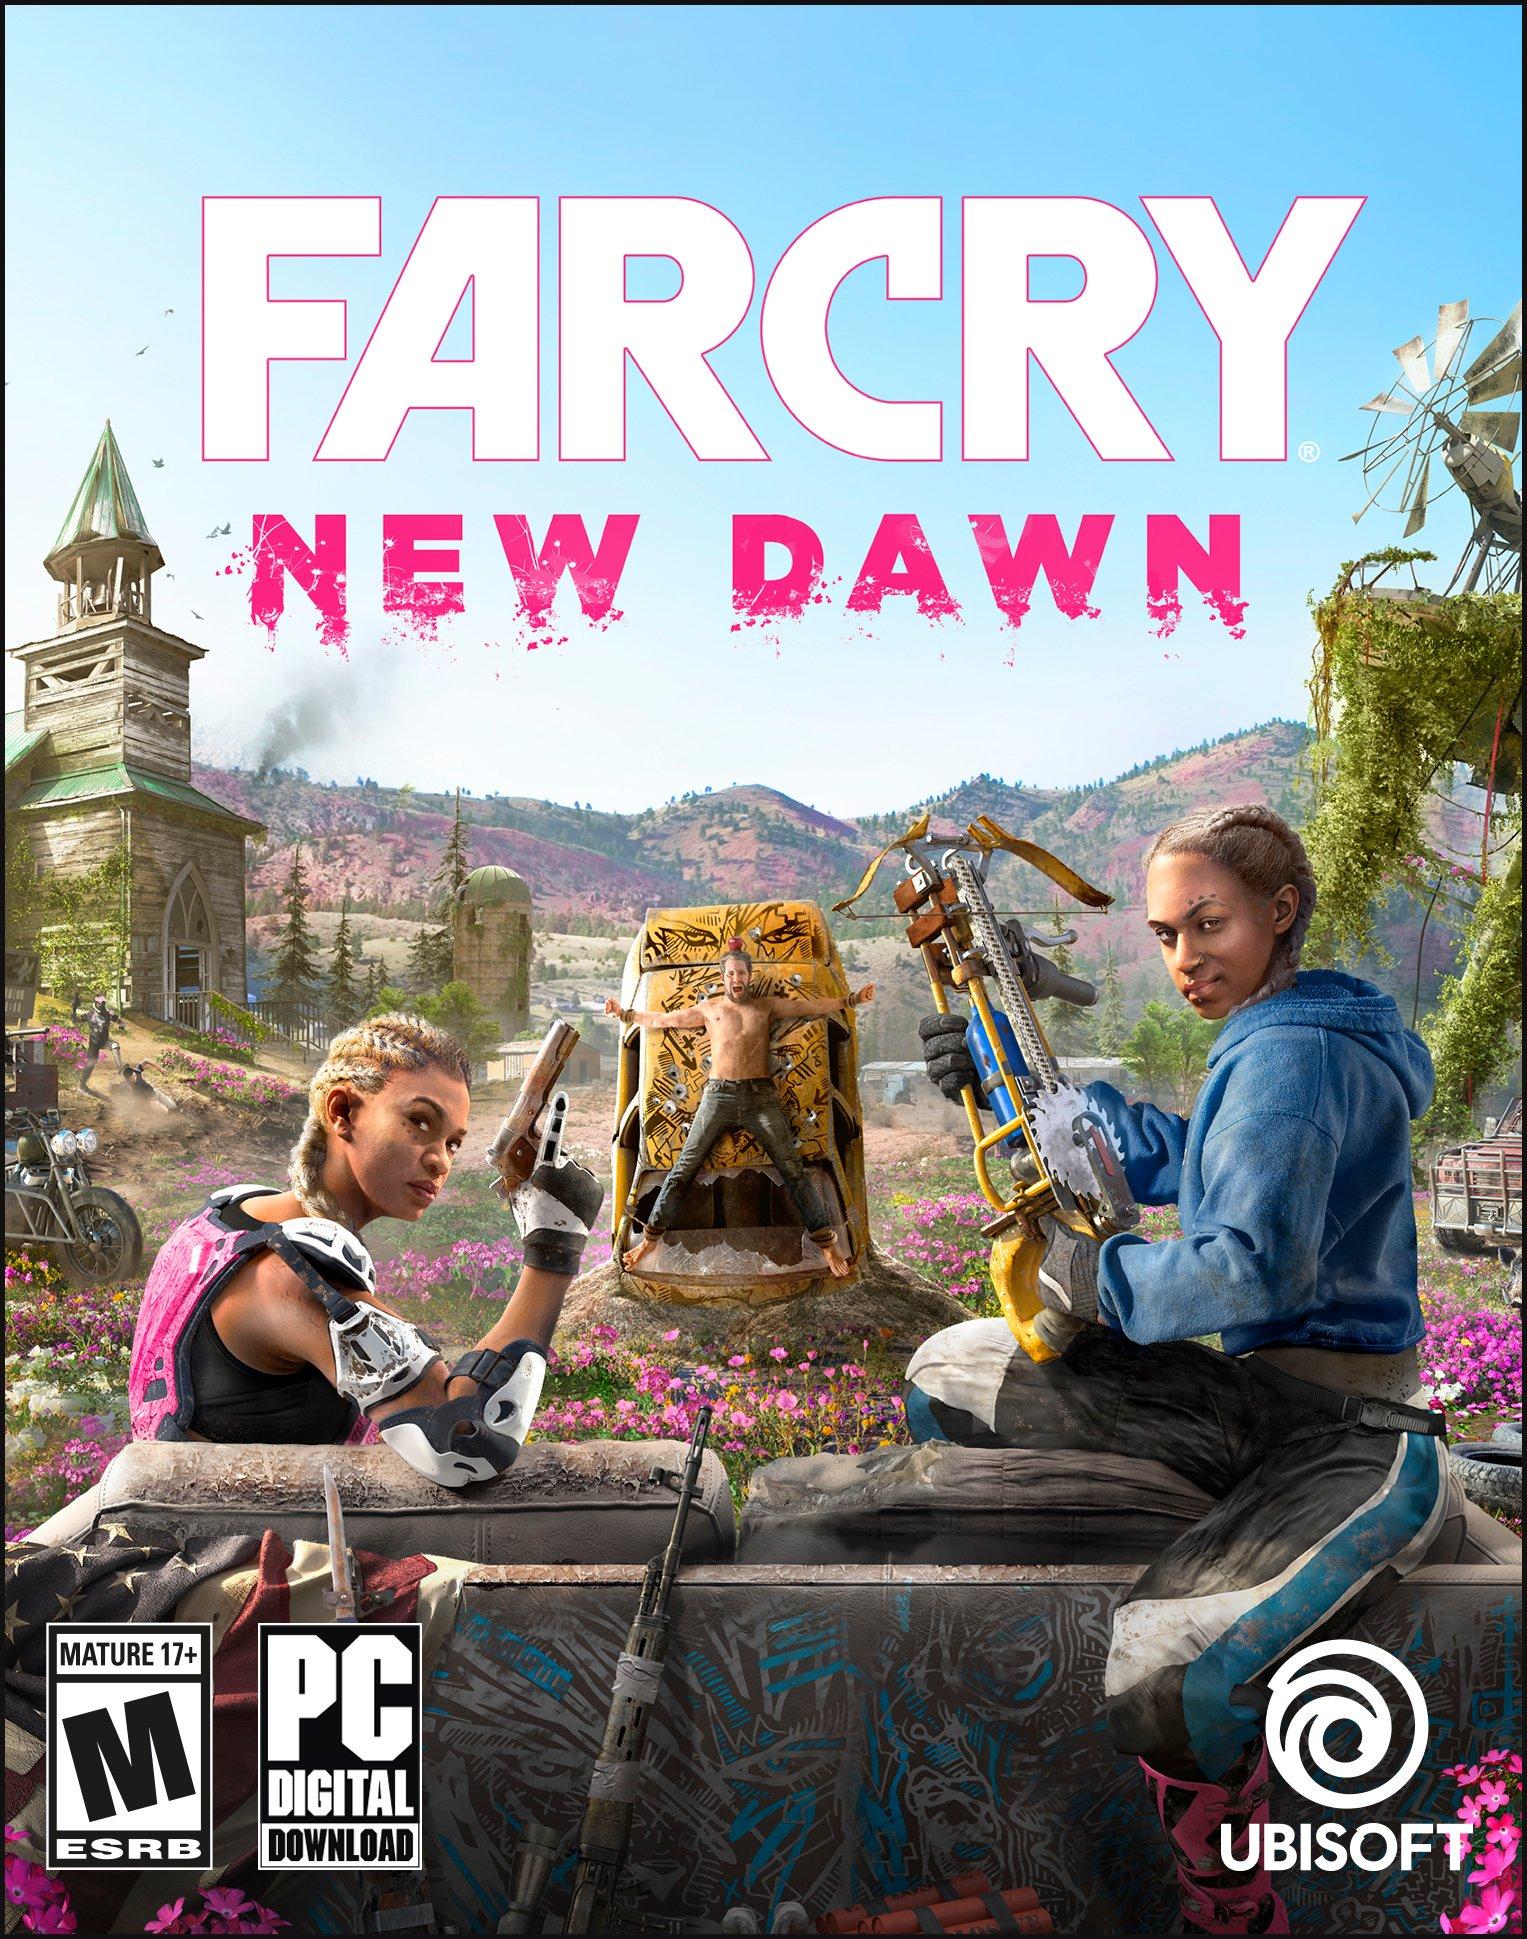 metacritic on X: 24 hours in review Crackdown 3 [XONE - 62]   Far Cry New Dawn [PS4 - 73]   Jump Force [PS4 - 63]  Metro Exodus [PC - 84]